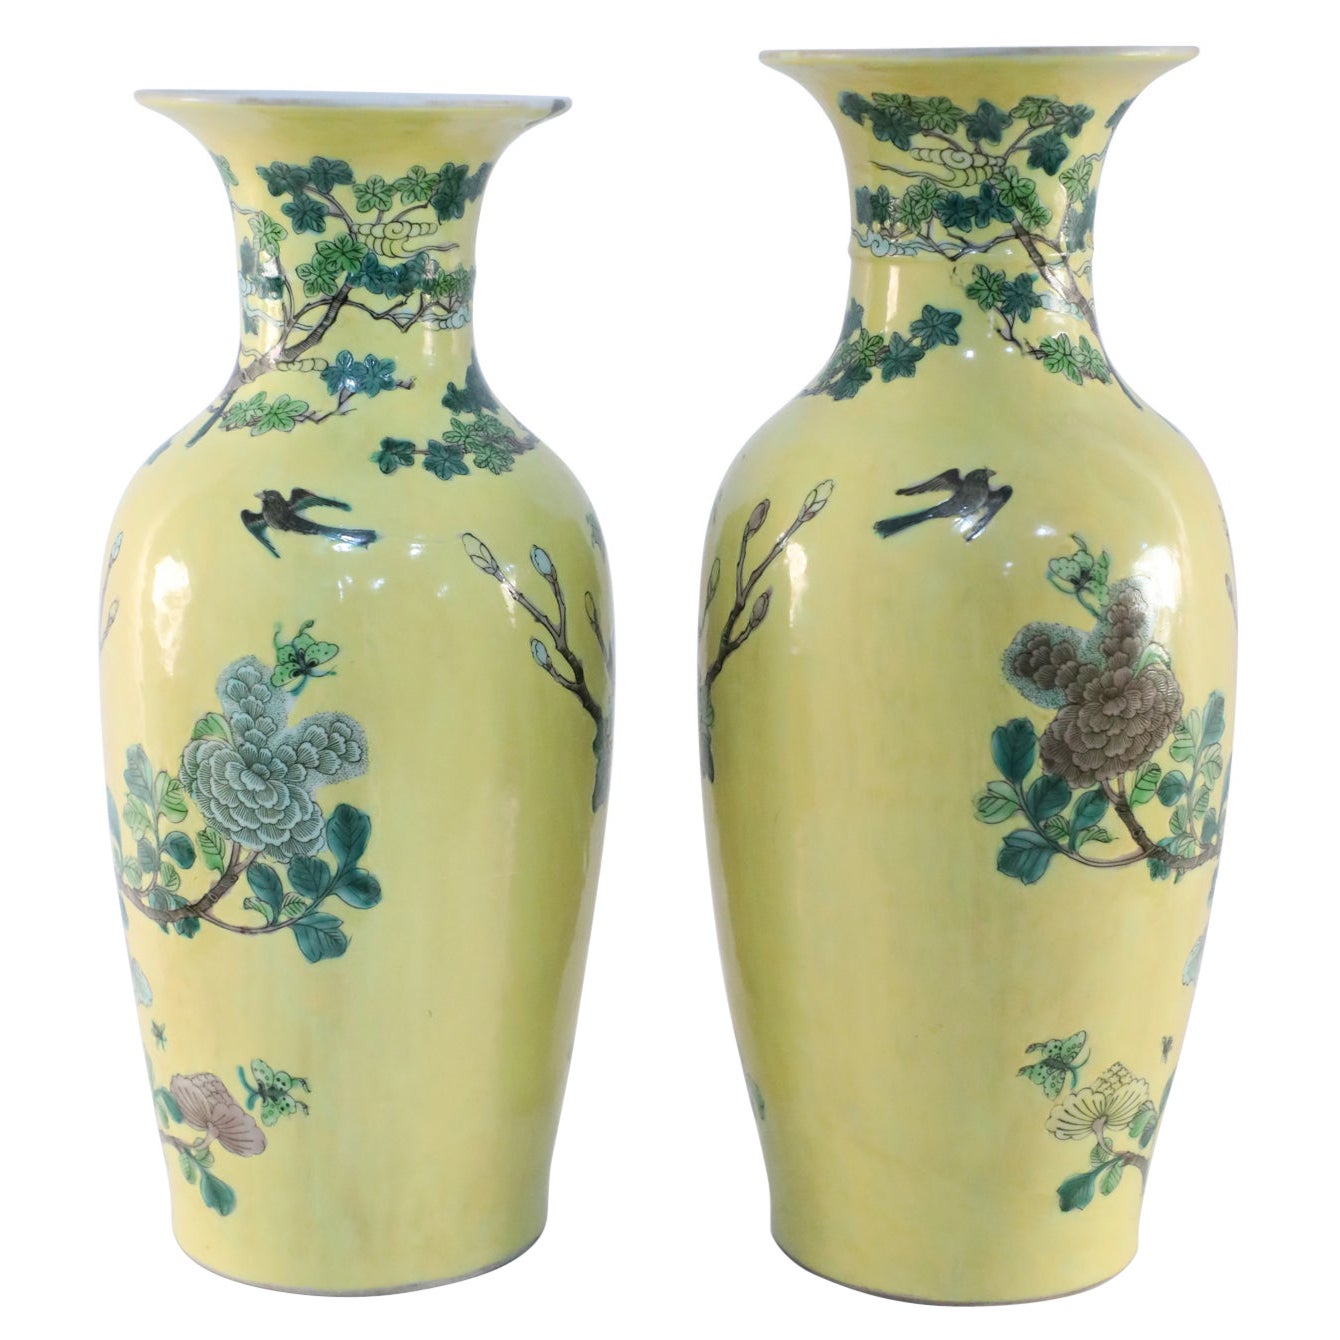 Pair of antique Chinese (19th century) export porcelain porcelain vases with a yellow ground wrapped in large scale branches teeming with birds, flowers and foliage (priced as pair).
    